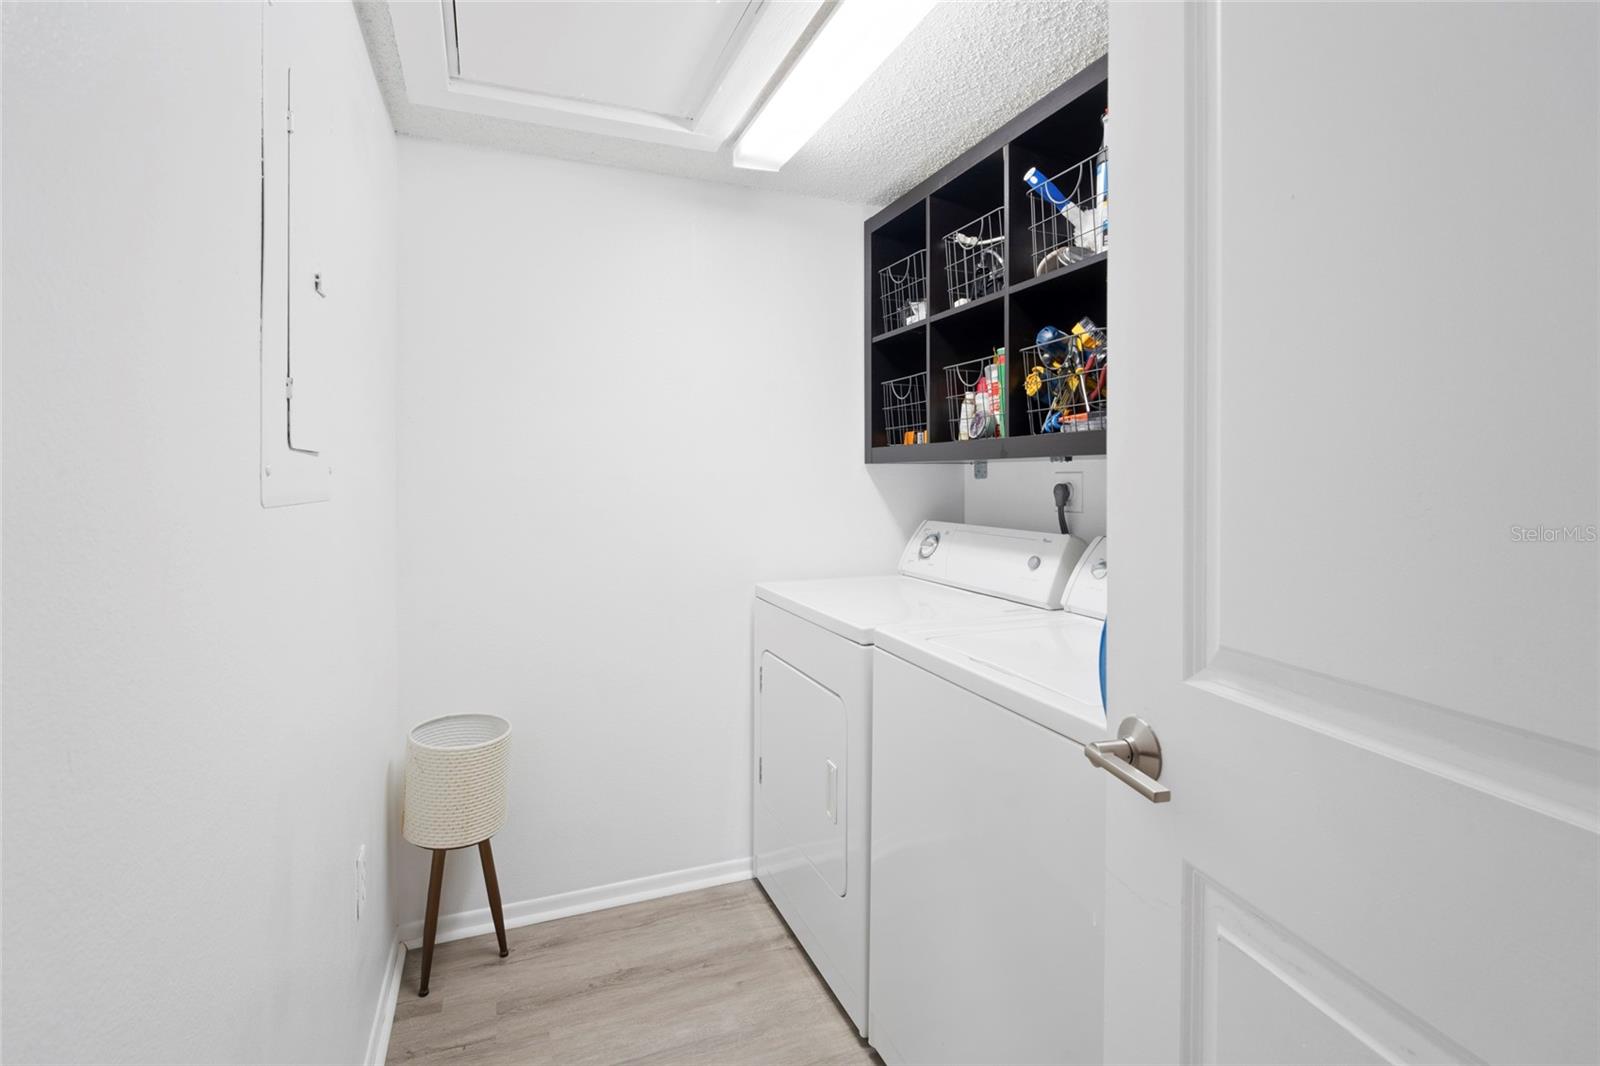 Laundry room with attic access and storage